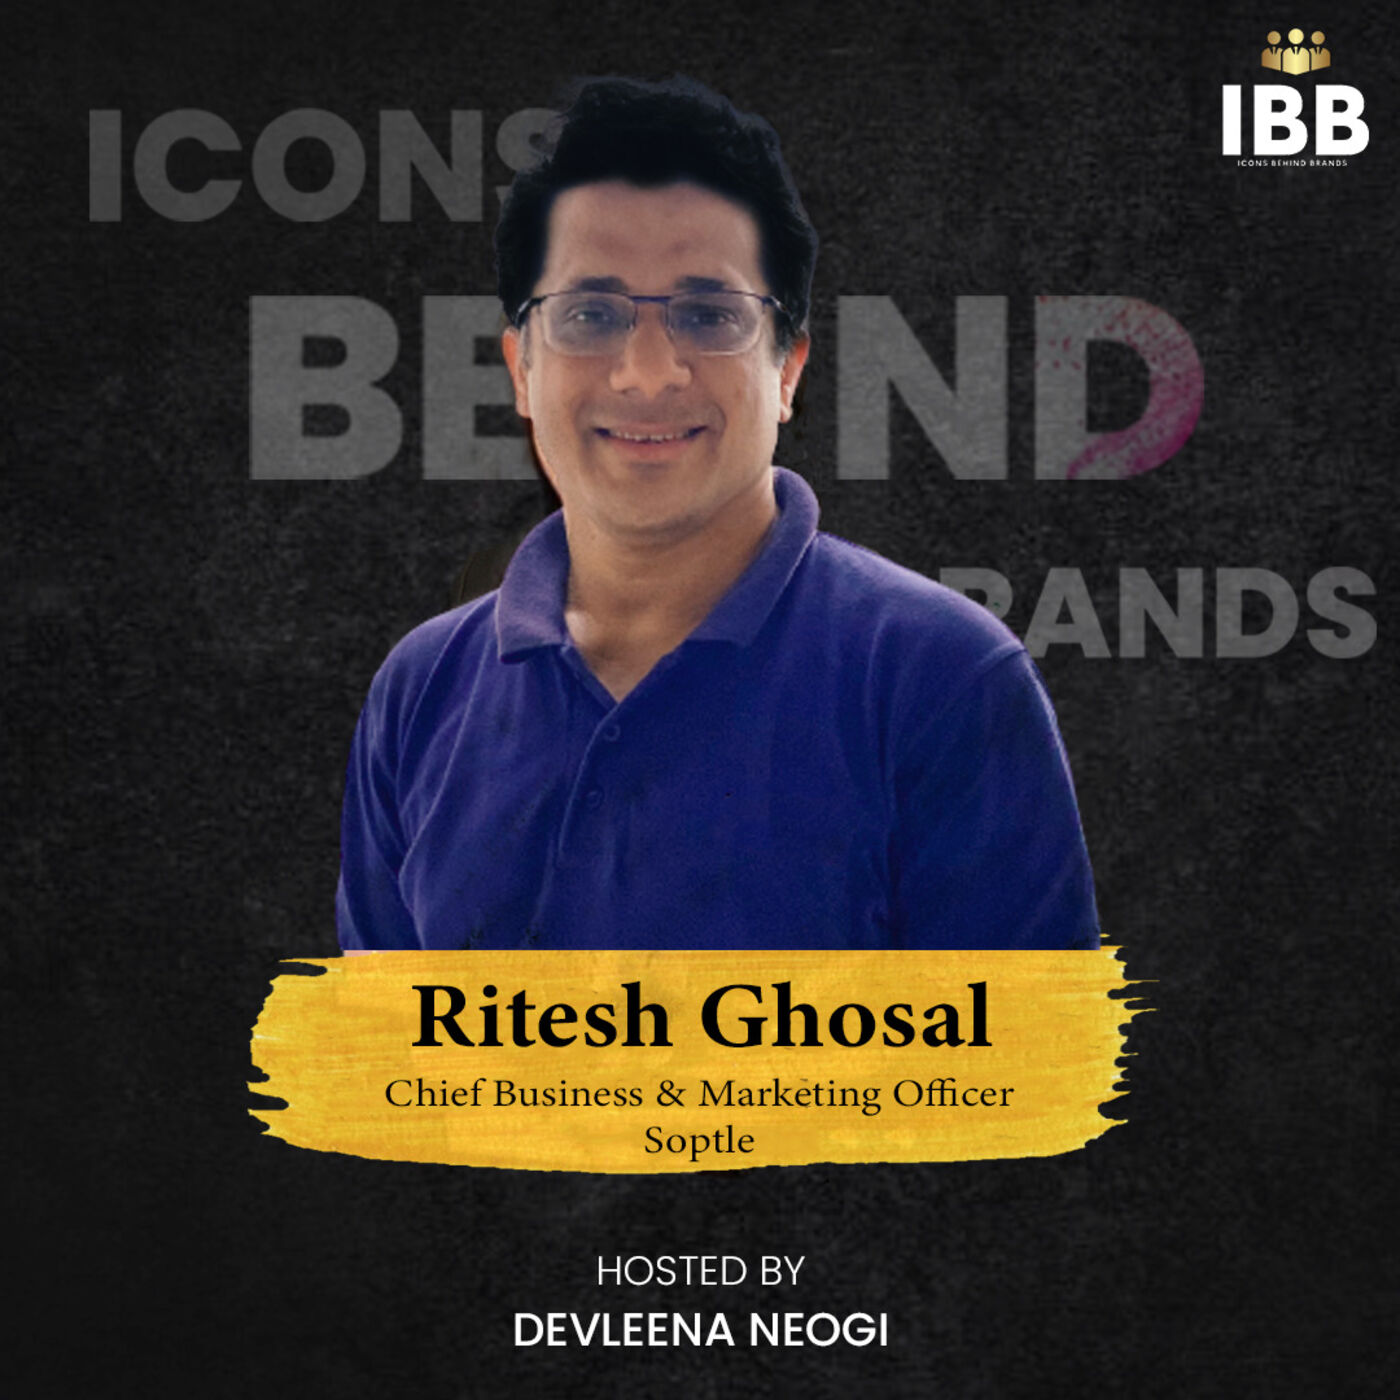 A Peek into The Upcoming Sunday’s Episode with Mr. Ritesh Ghosal